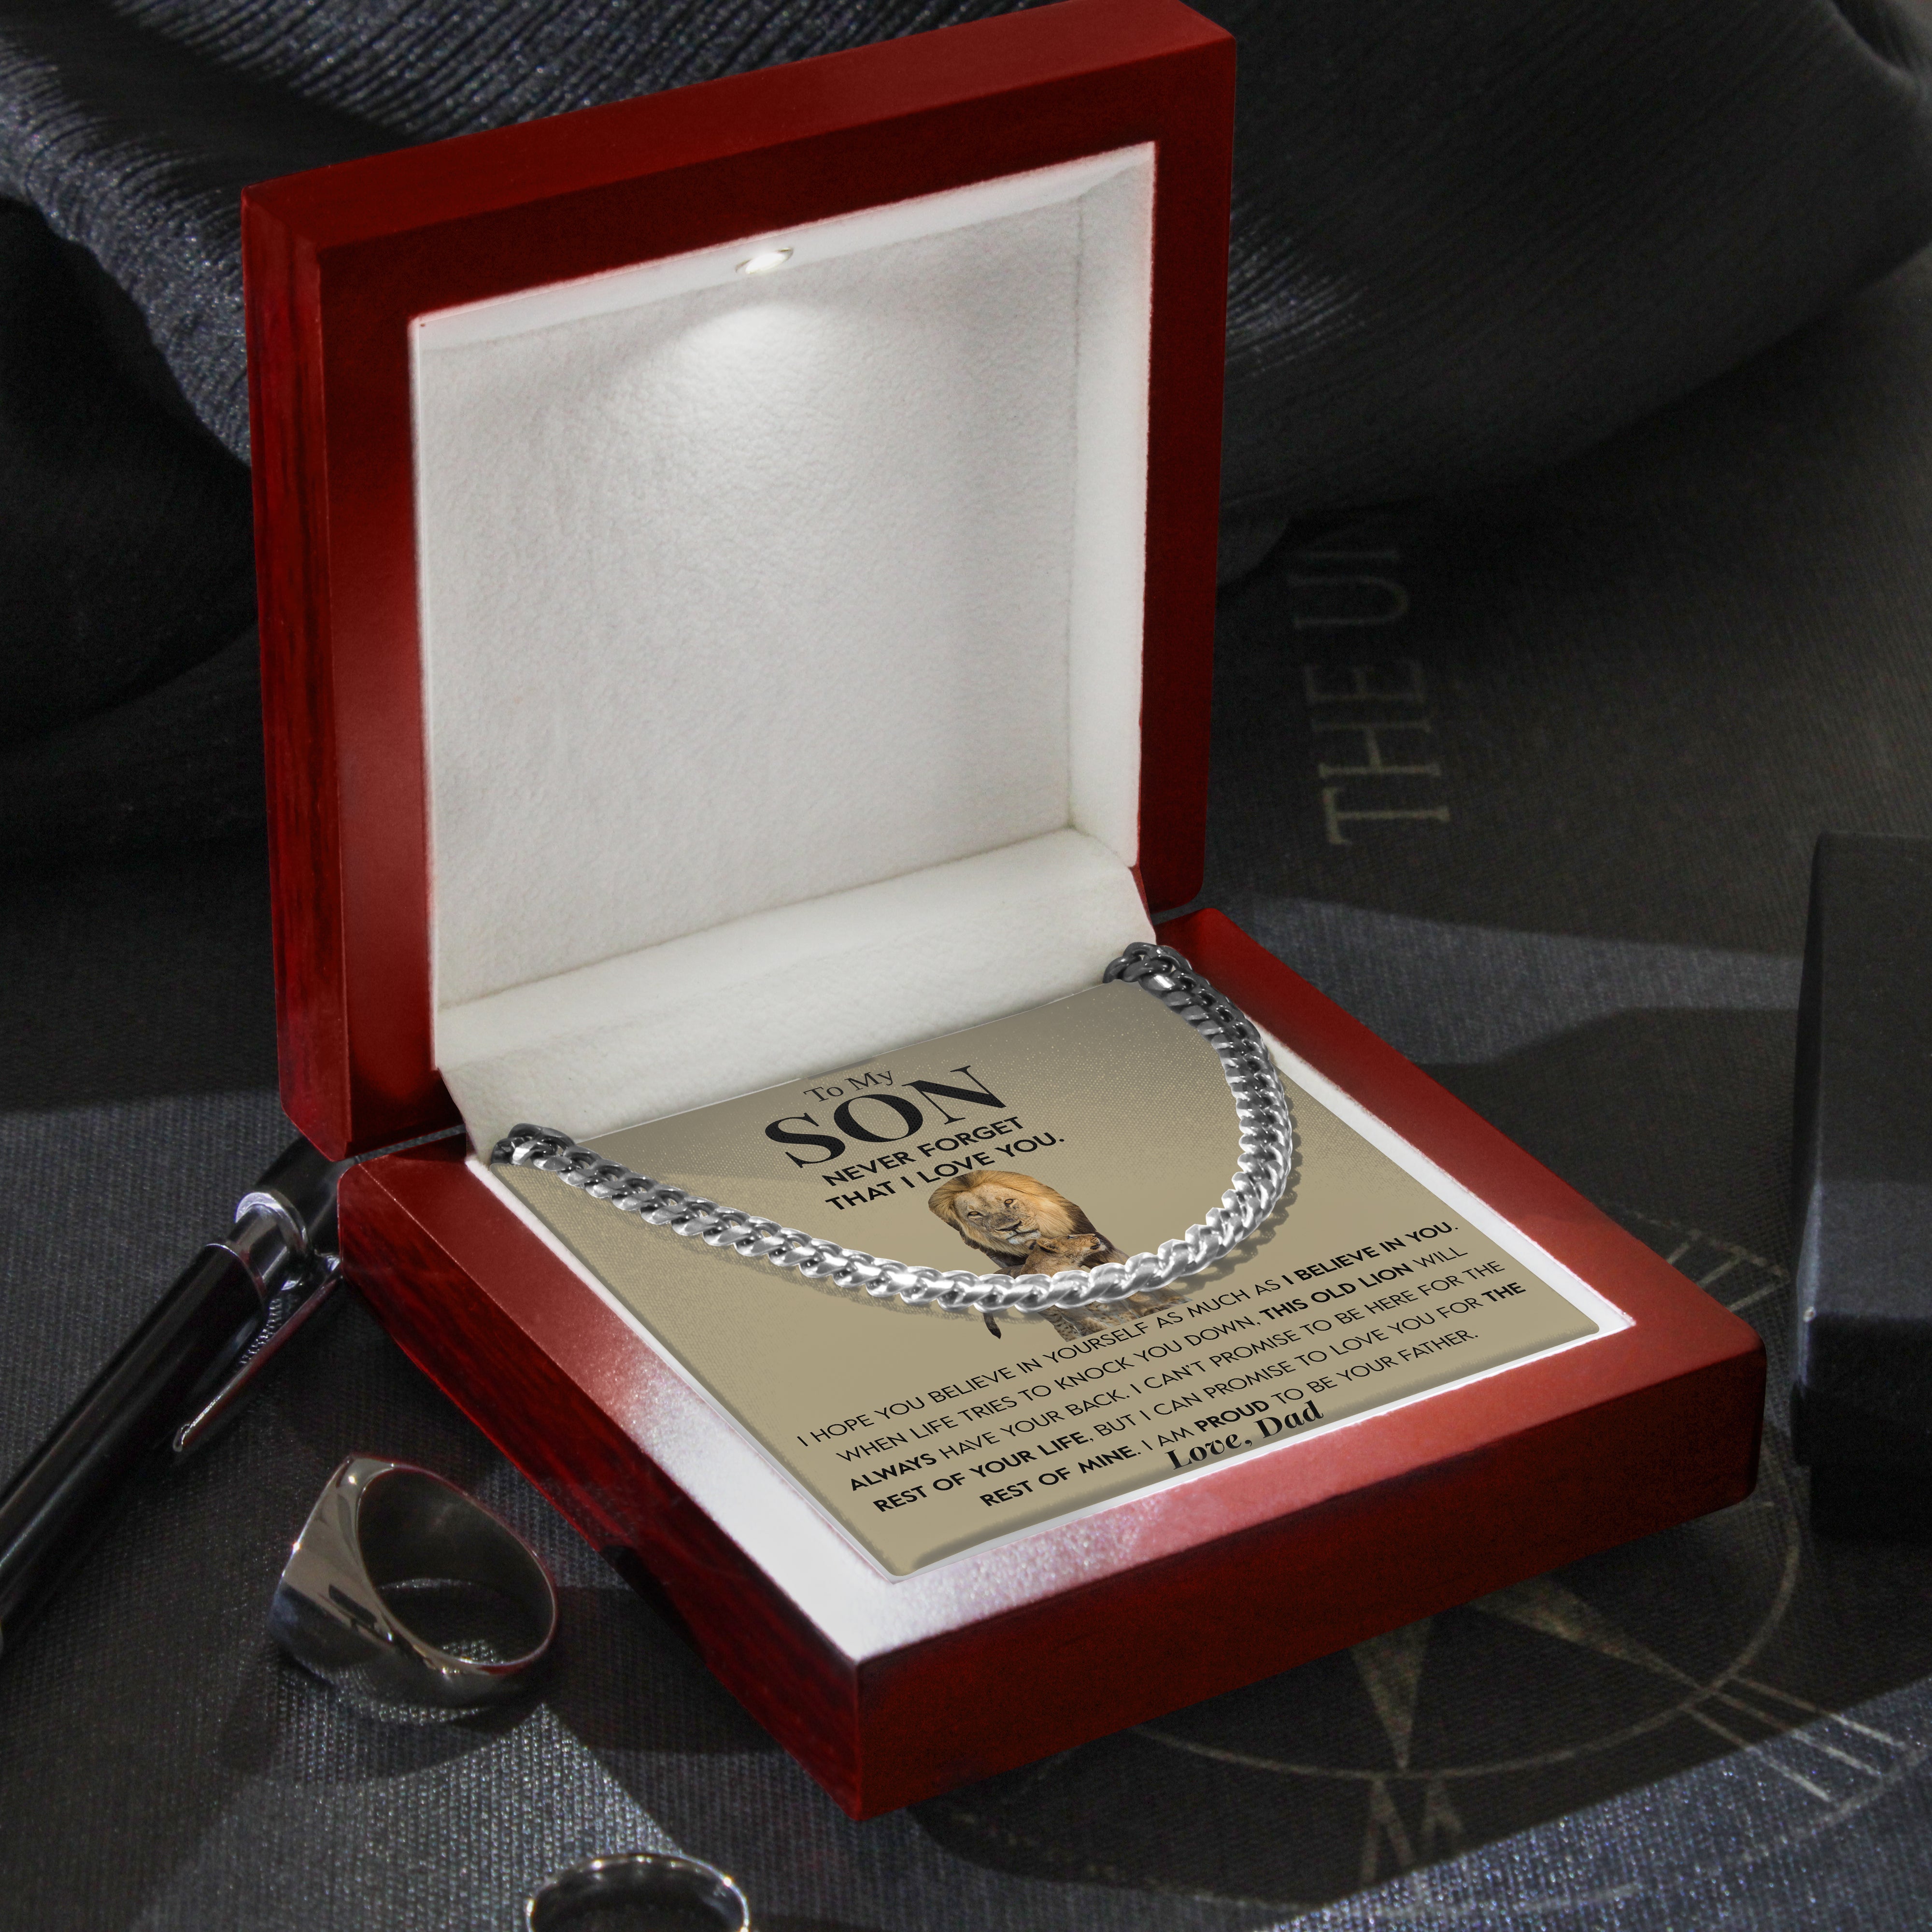 To My Son | "This Old Lion" | Cuban Neck Chain